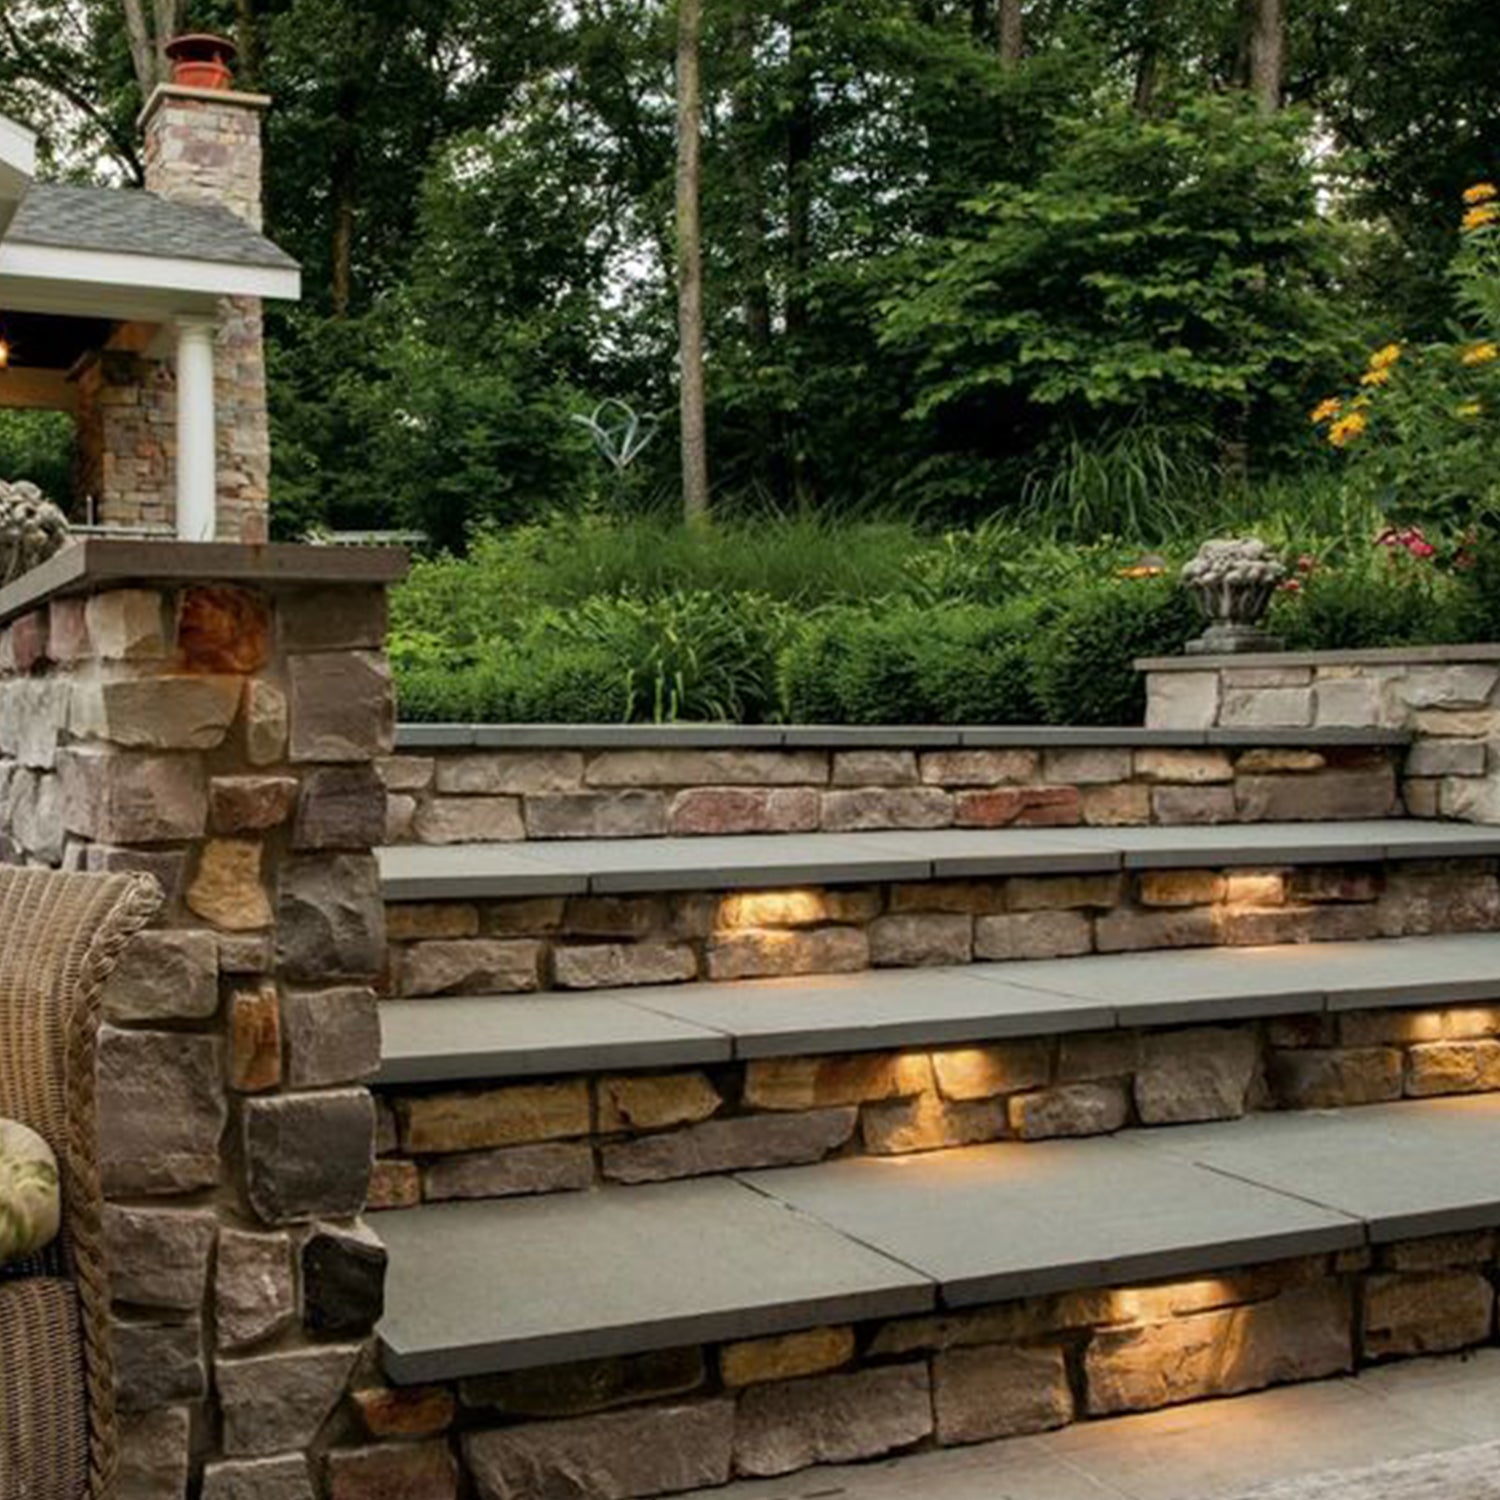 Outdoor stone staircase with integrated LED hardscape lights illuminating each step, surrounded by lush greenery and stone wall, showcasing durable and energy-efficient lighting solutions for outdoor spaces.